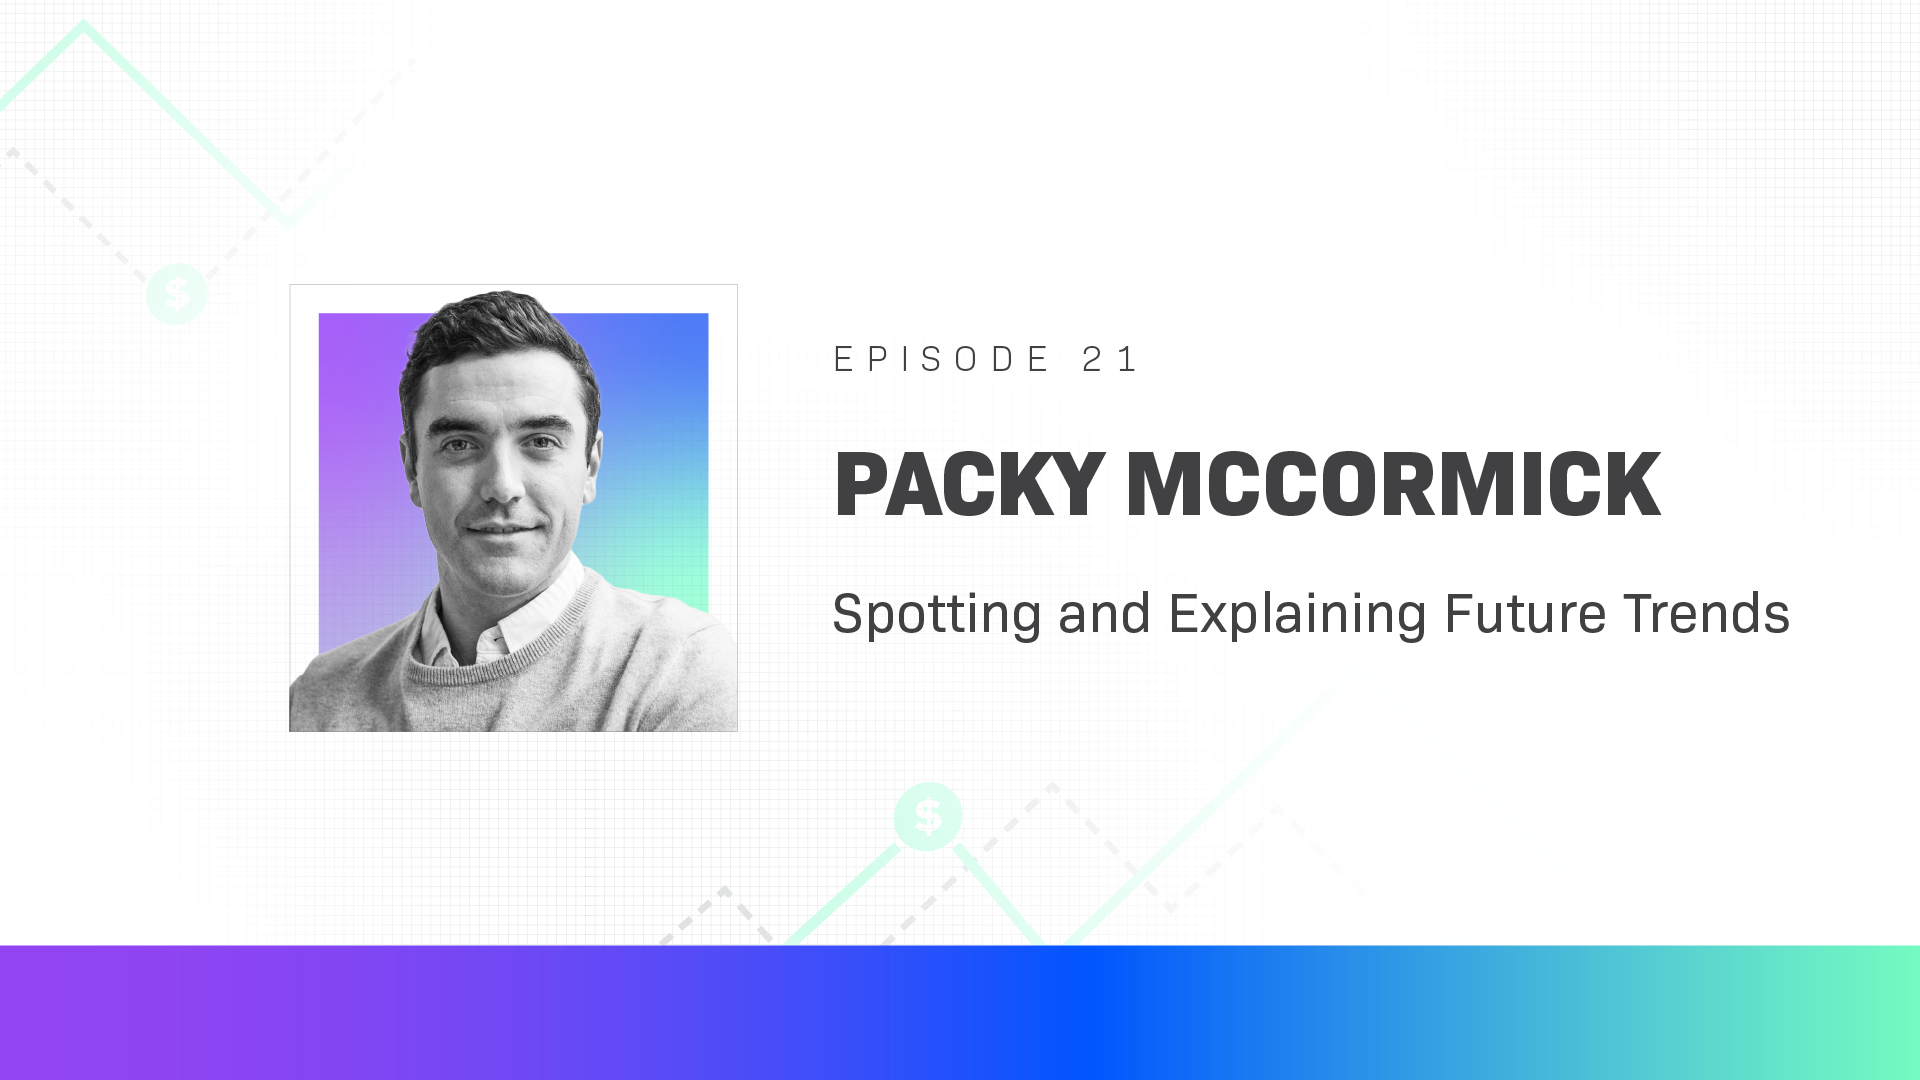 Packy McCormick on Spotting and Explaining Future Trends